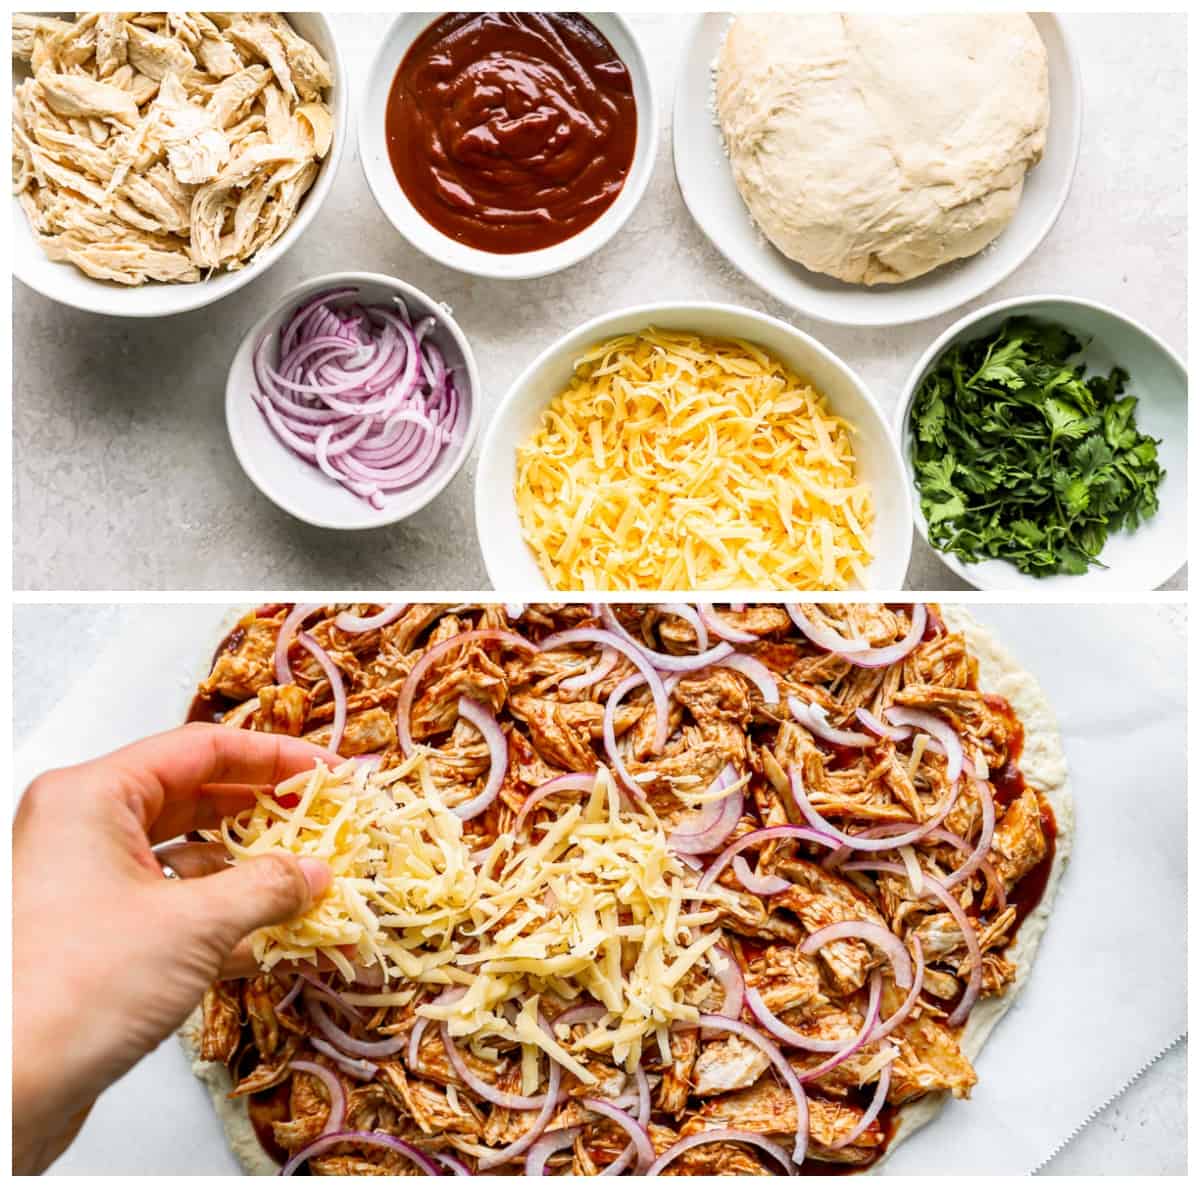 bbq chicken pizza ingredients; a hand sprinkling cheese on top of a pizza with chicken, red onions, and bbq sauce.